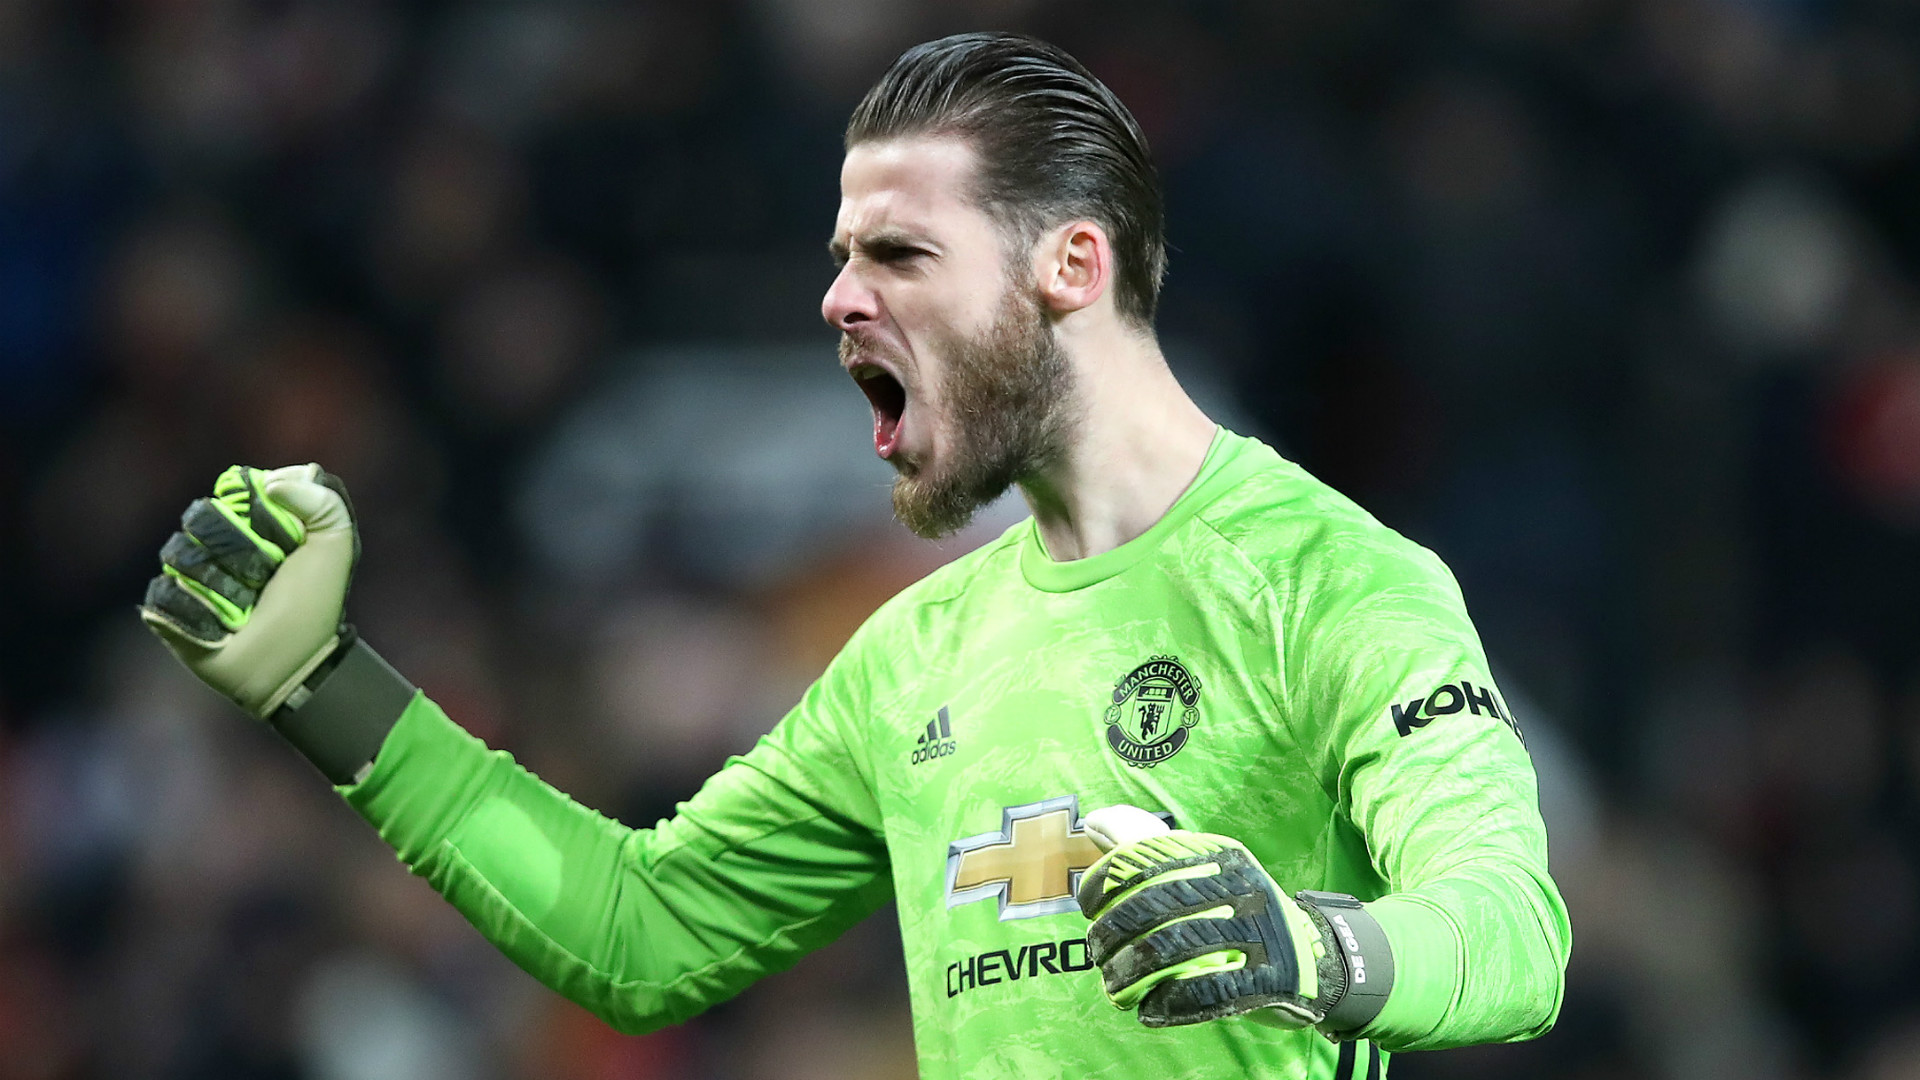 De Gea has been best goalkeeper in the world for a decade, says Manchester United manager Solskjaer